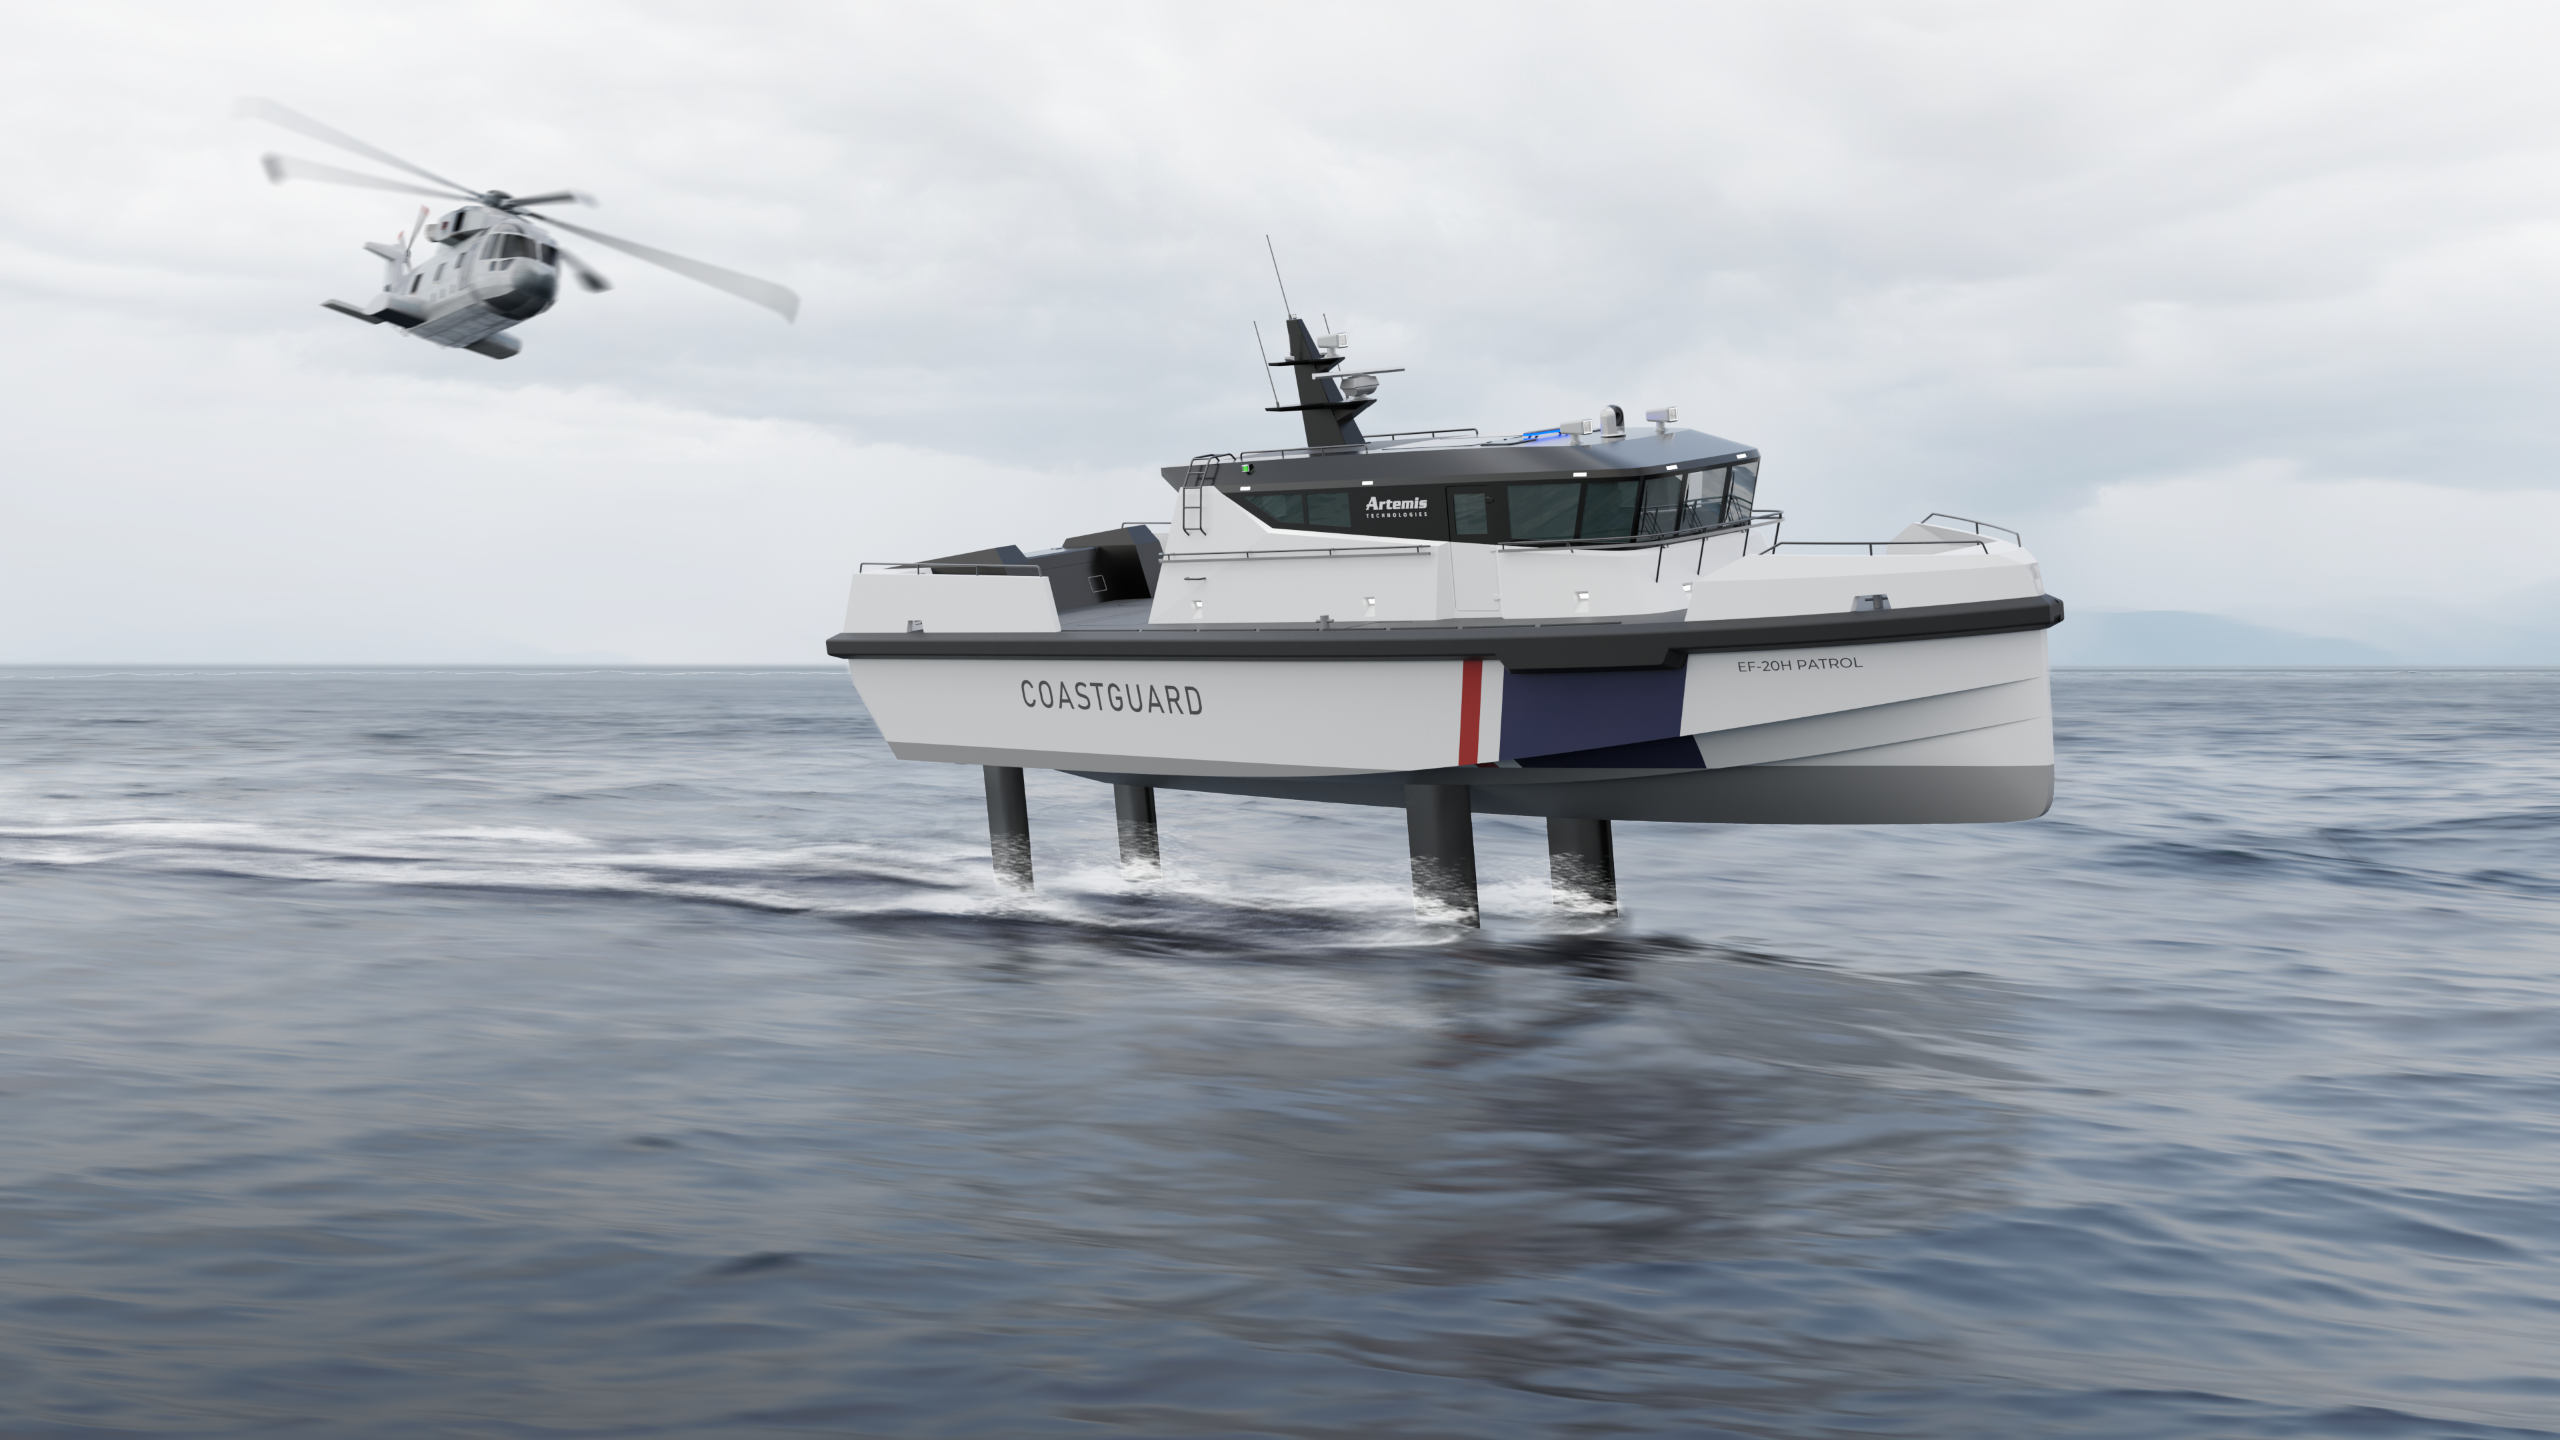 Artemis EF-20H Patrol foiling with helicopter flying behind. The Patrol boat reads coastguard on the side.